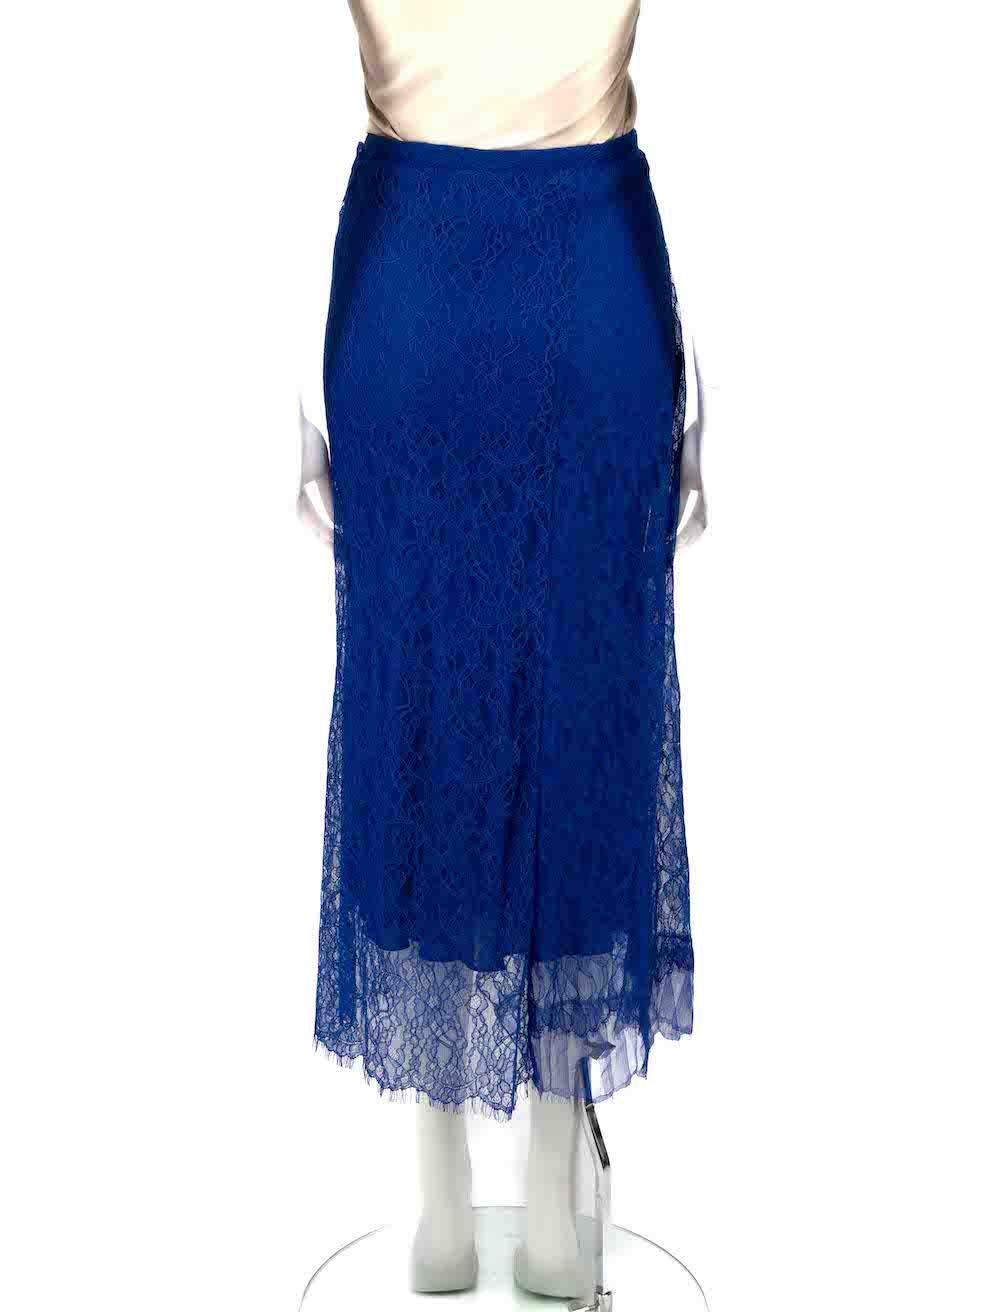 3.1 Phillip Lim Blue Lace Midi Slip Skirt Size L In New Condition For Sale In London, GB